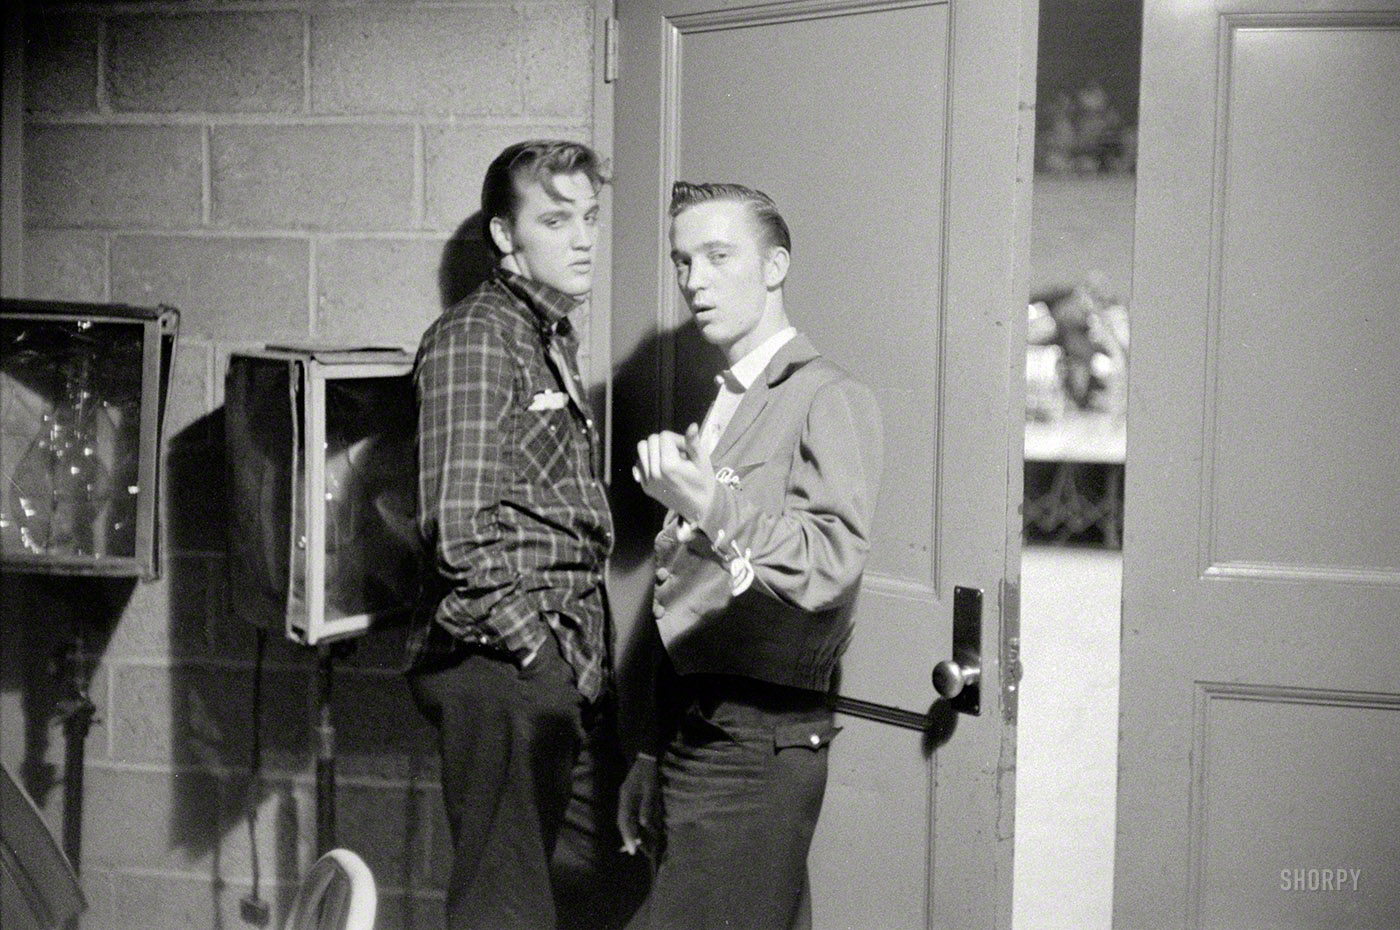 May 27, 1956. Dayton, Ohio. Elvis Presley with his cousin Gene Smith backstage at the University of Dayton field house, on the threshold of superstardom. 35mm negative by Phillip Harrington for Look magazine. View full size.